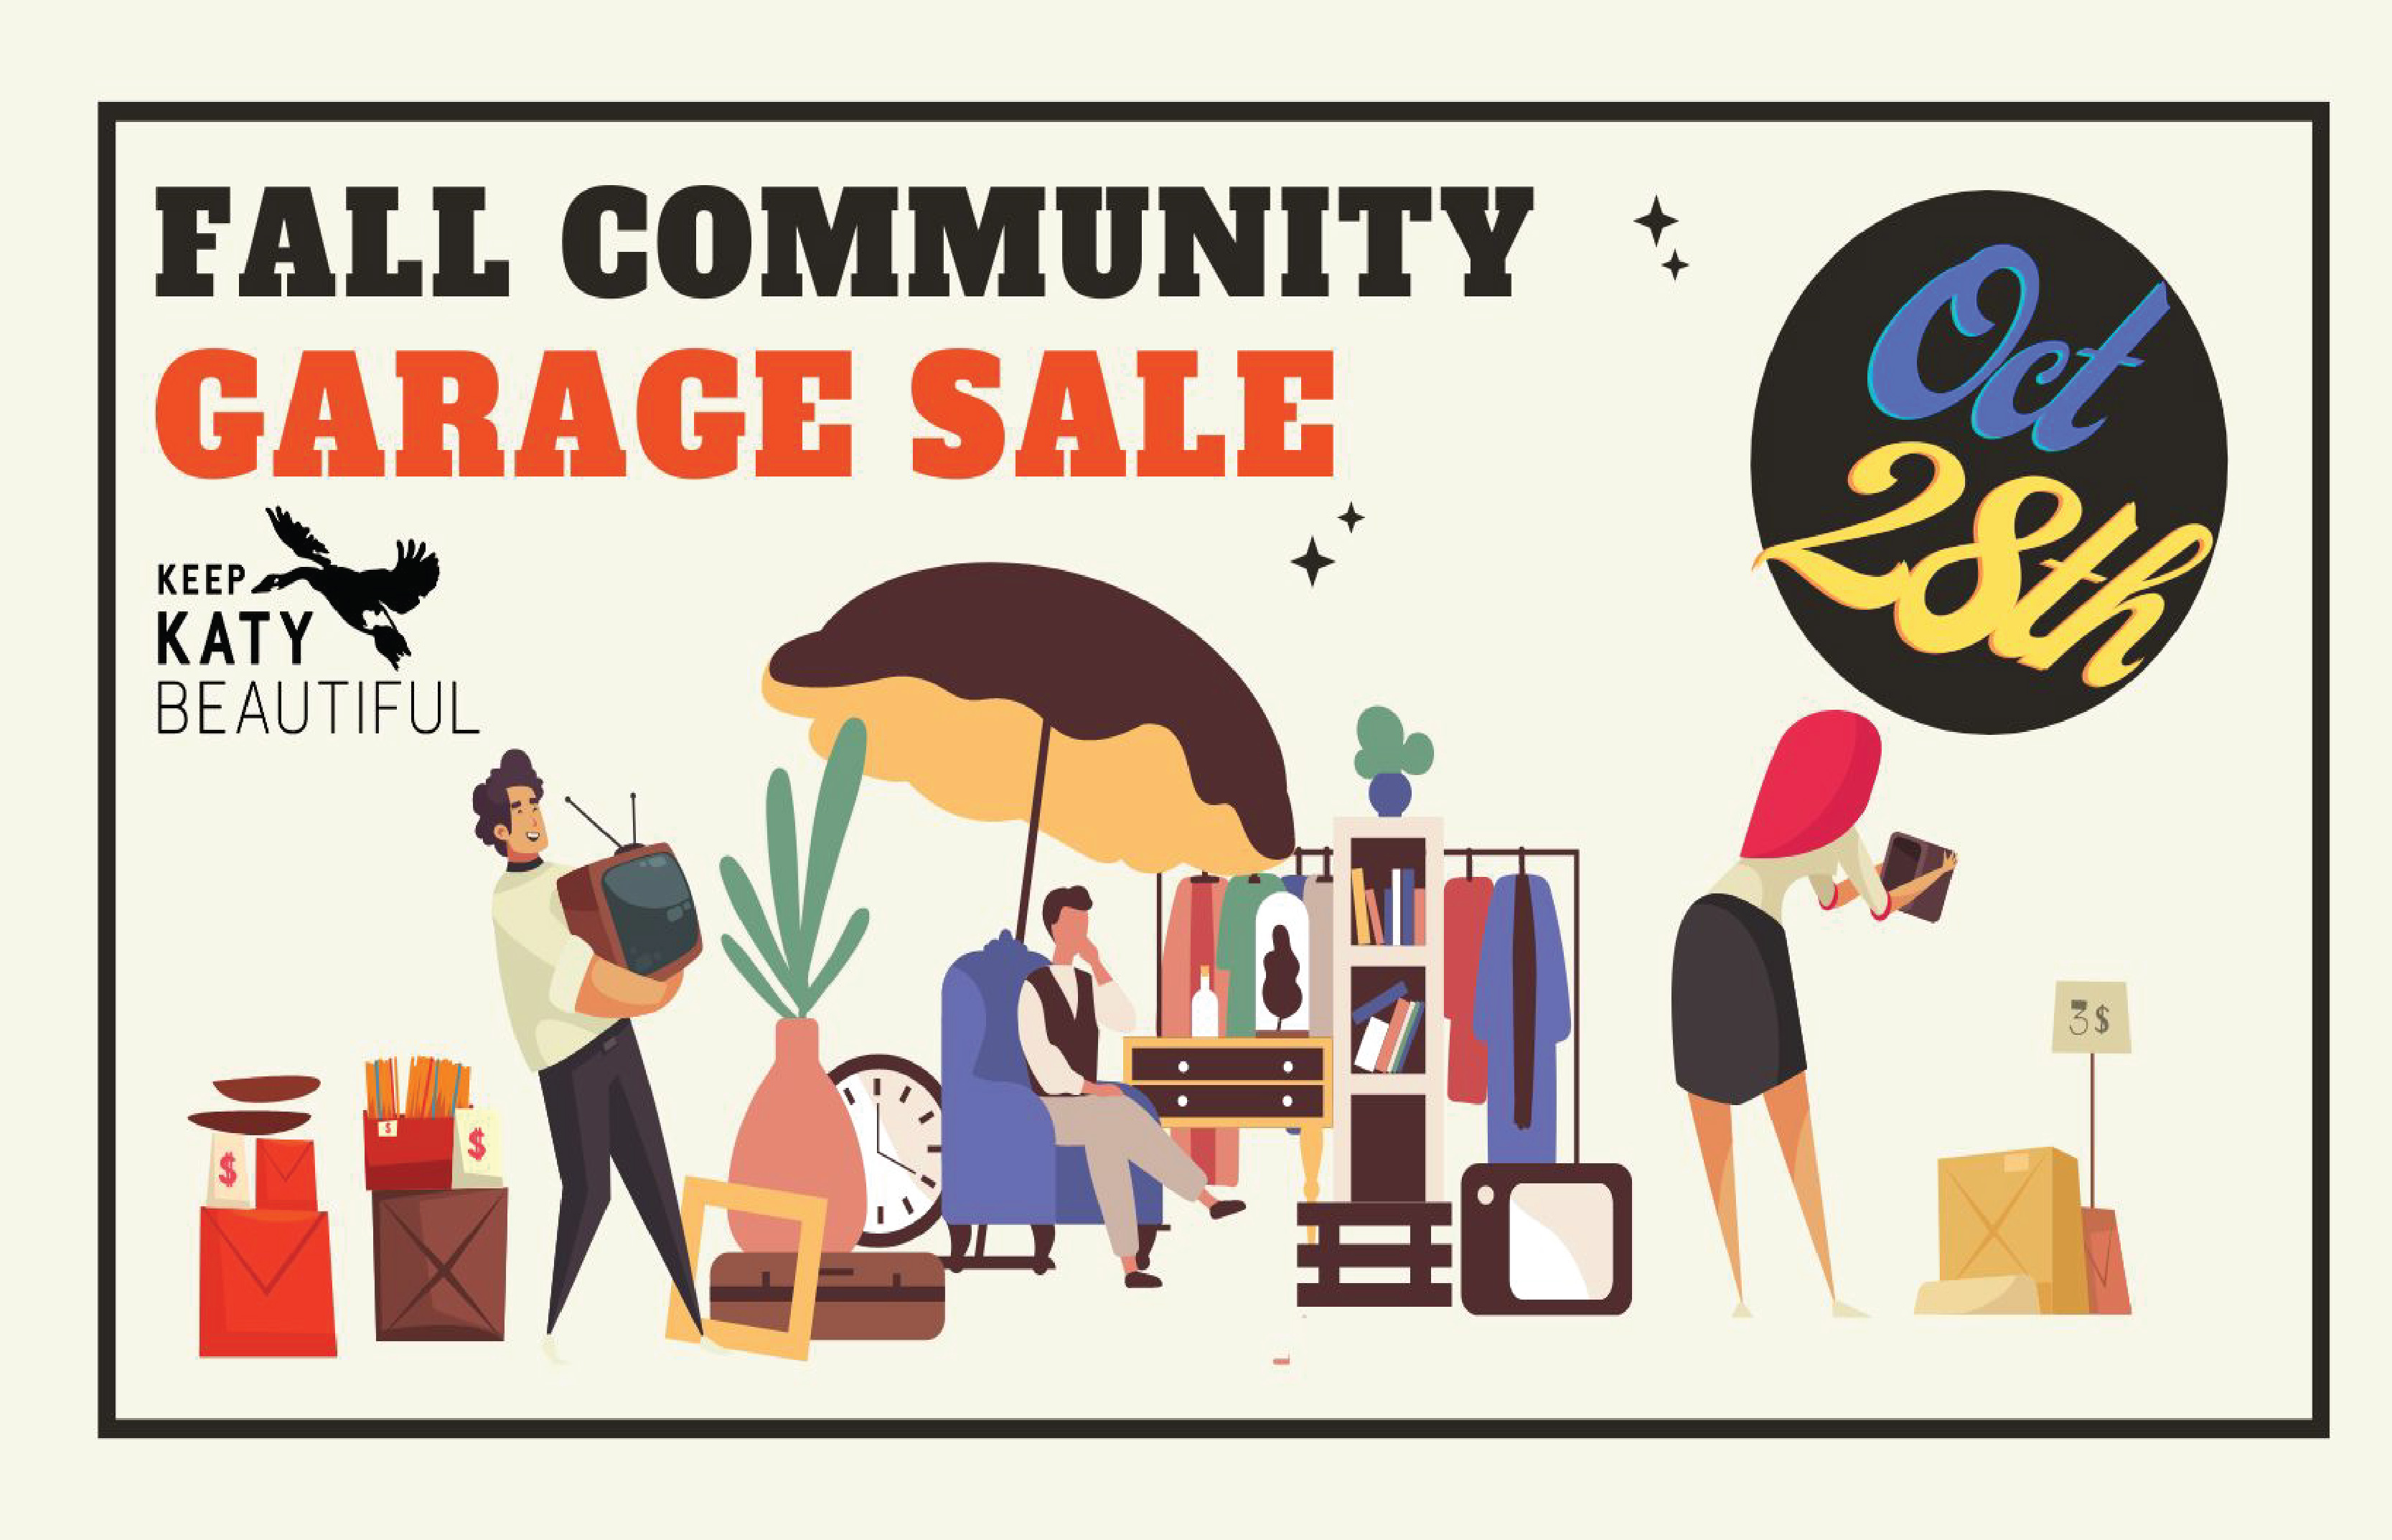 Sign Up for the City of Katy Fall Community Garage Sale